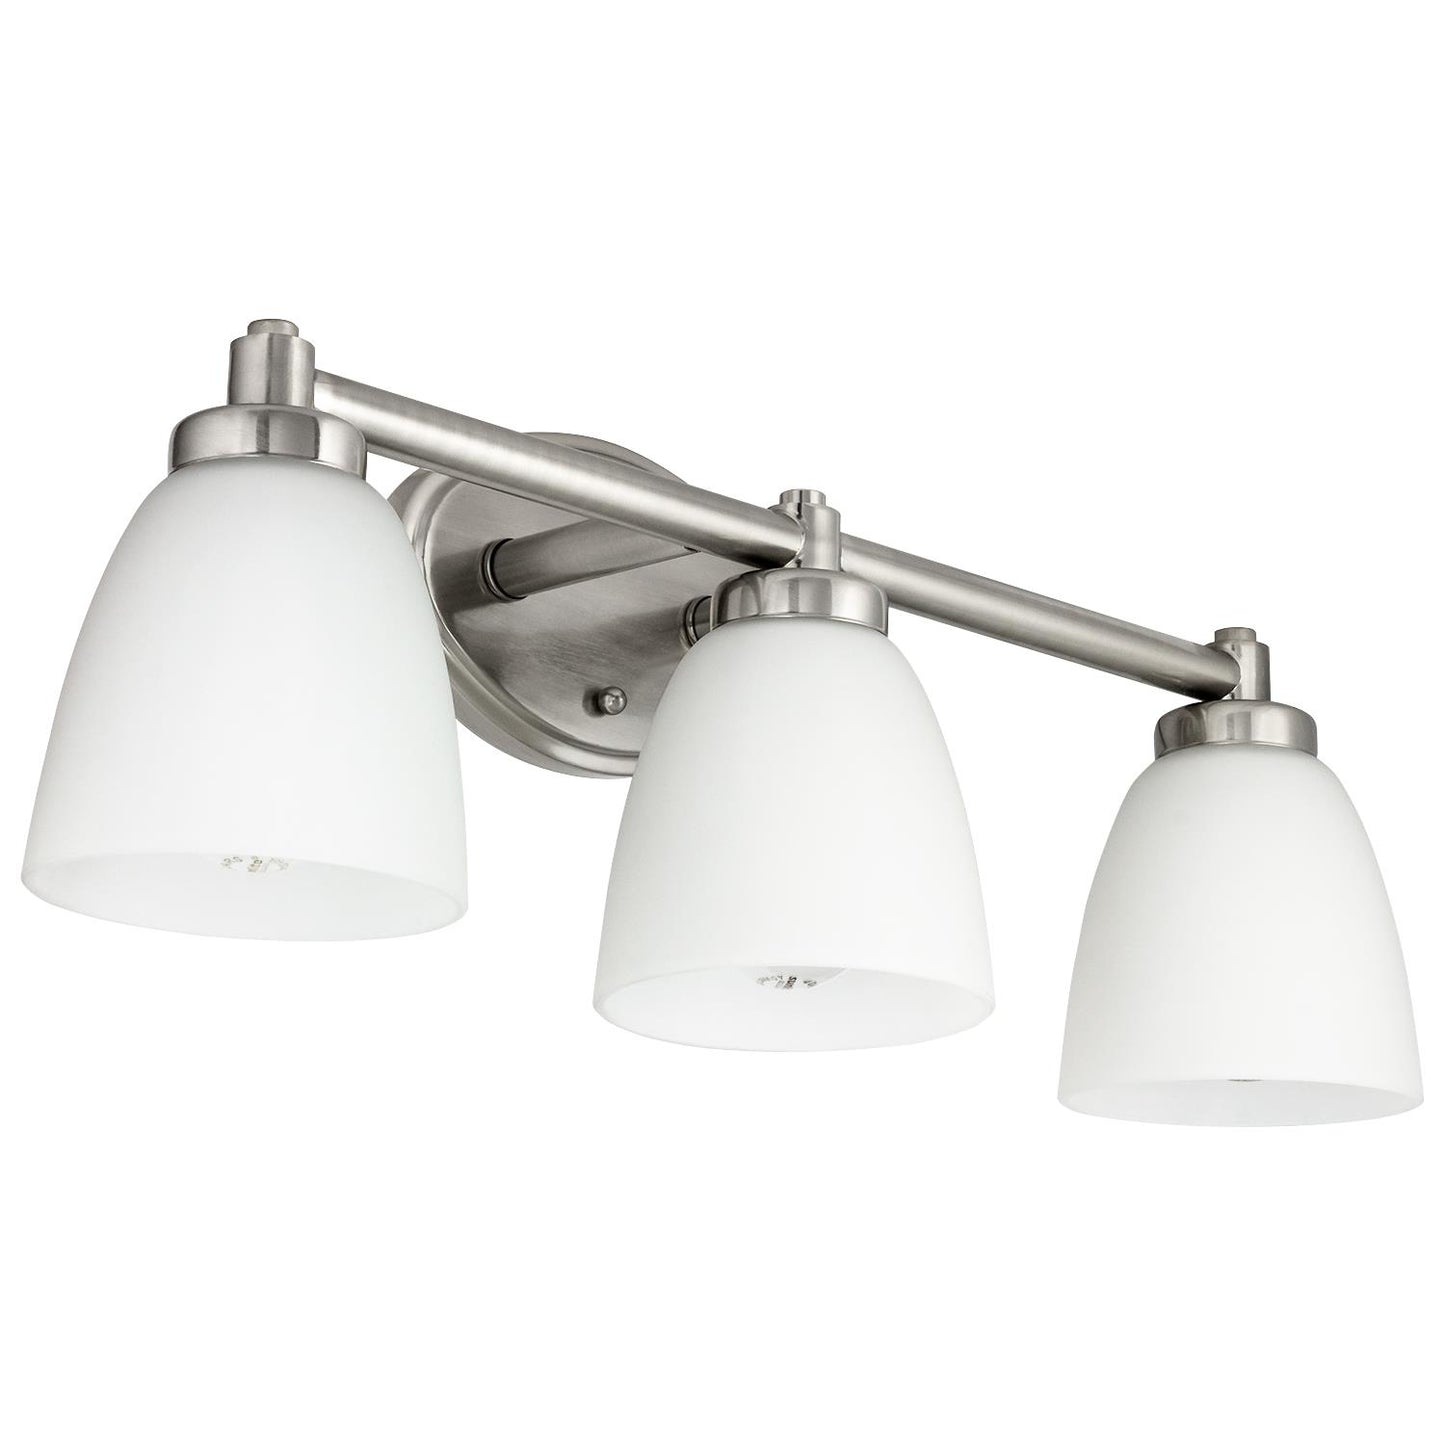 Sunlite 45059-SU Vanity Fixture Three Light 24 Inch Bar,  Bell Shaped Frosted Glass , Brushed Nickel Finish